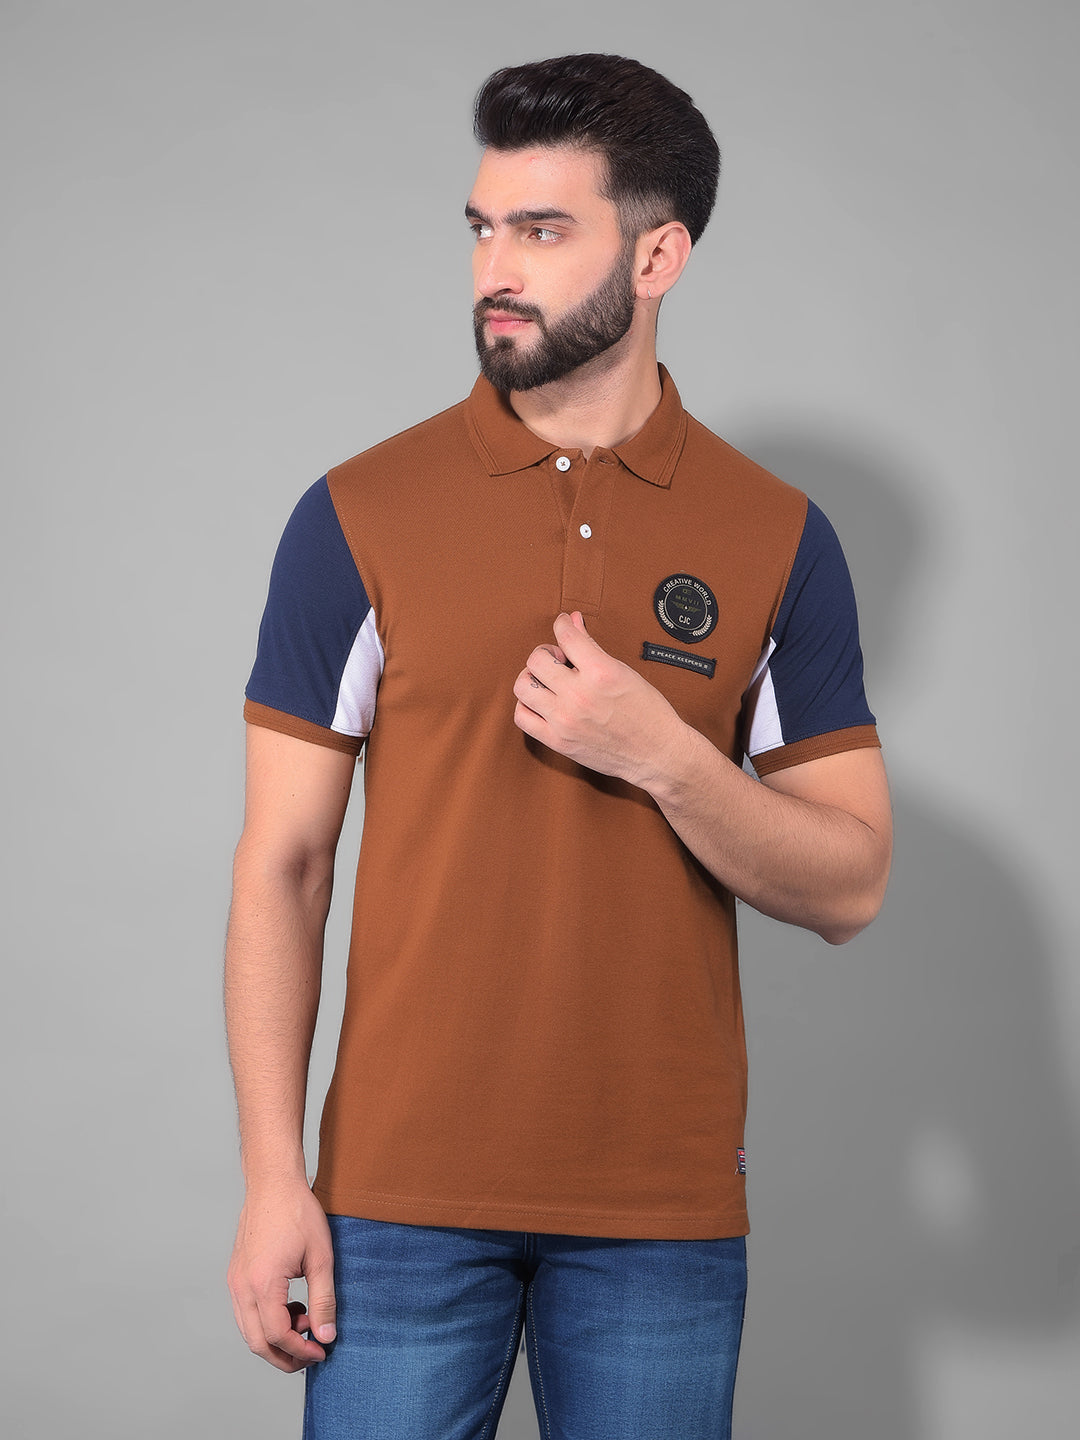 cobb solid brown polo neck t-shirt